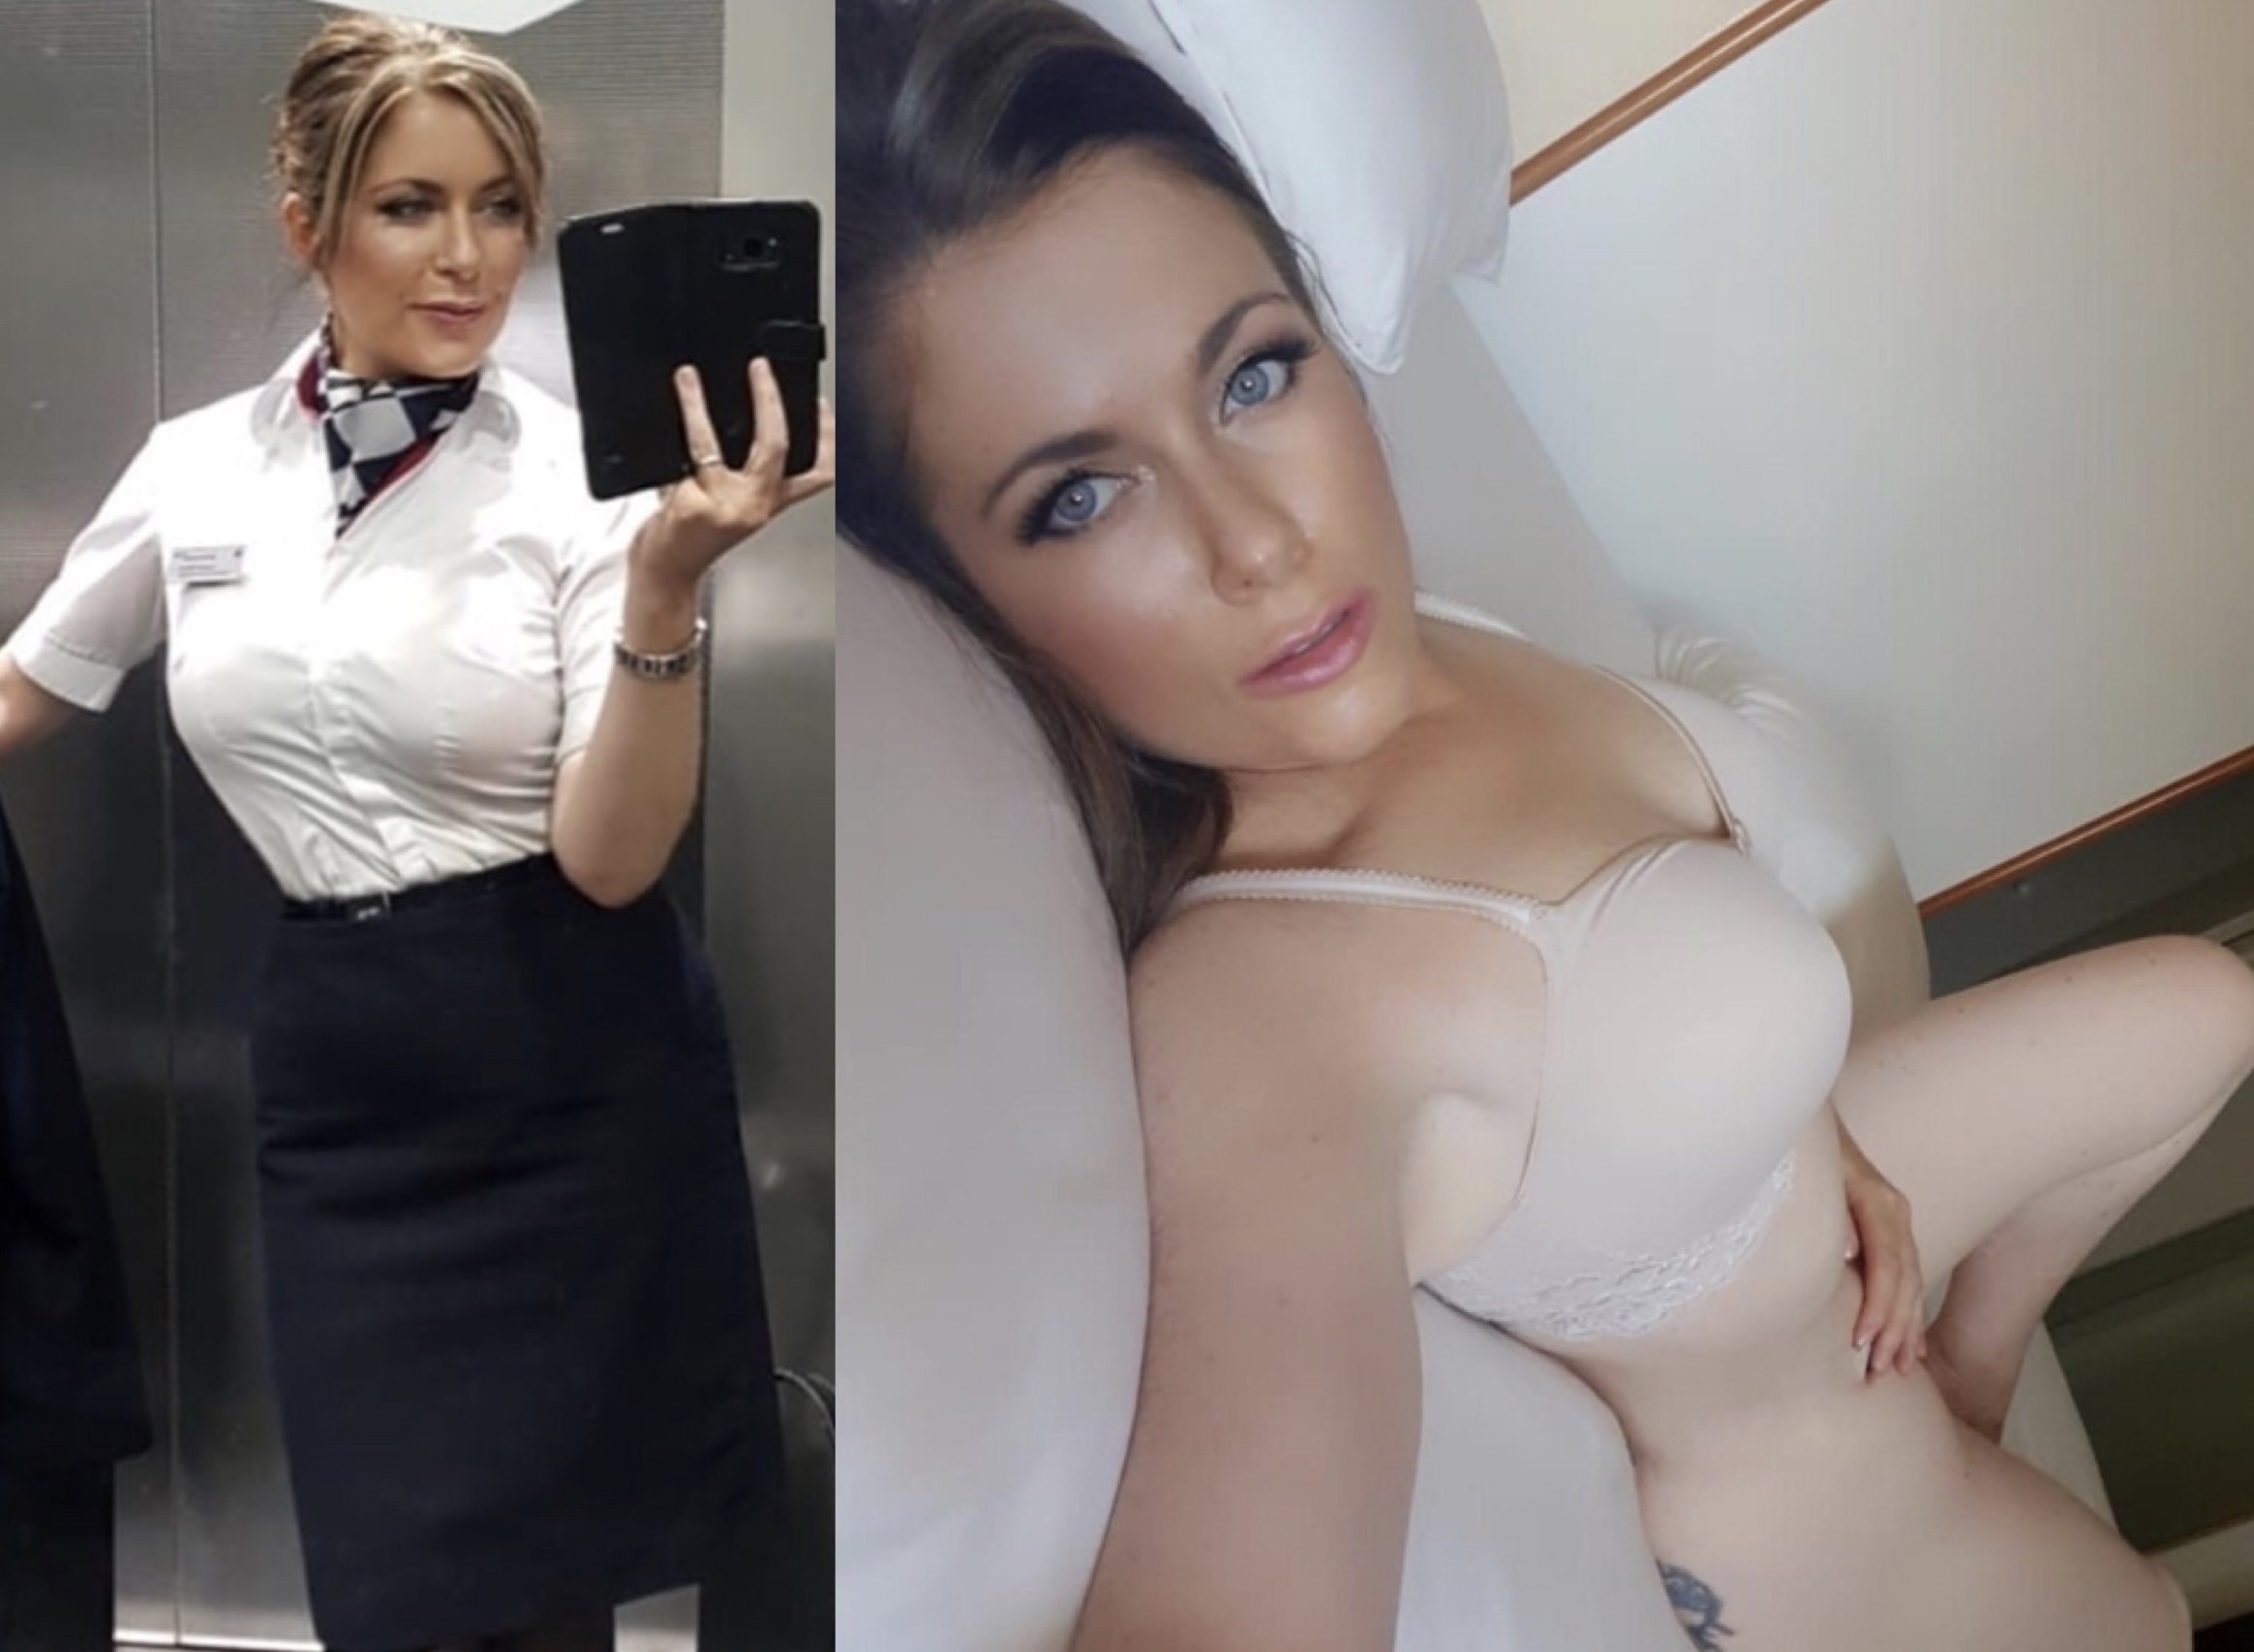 diane m flaherty recommends Flight Attendant Nude Selfies